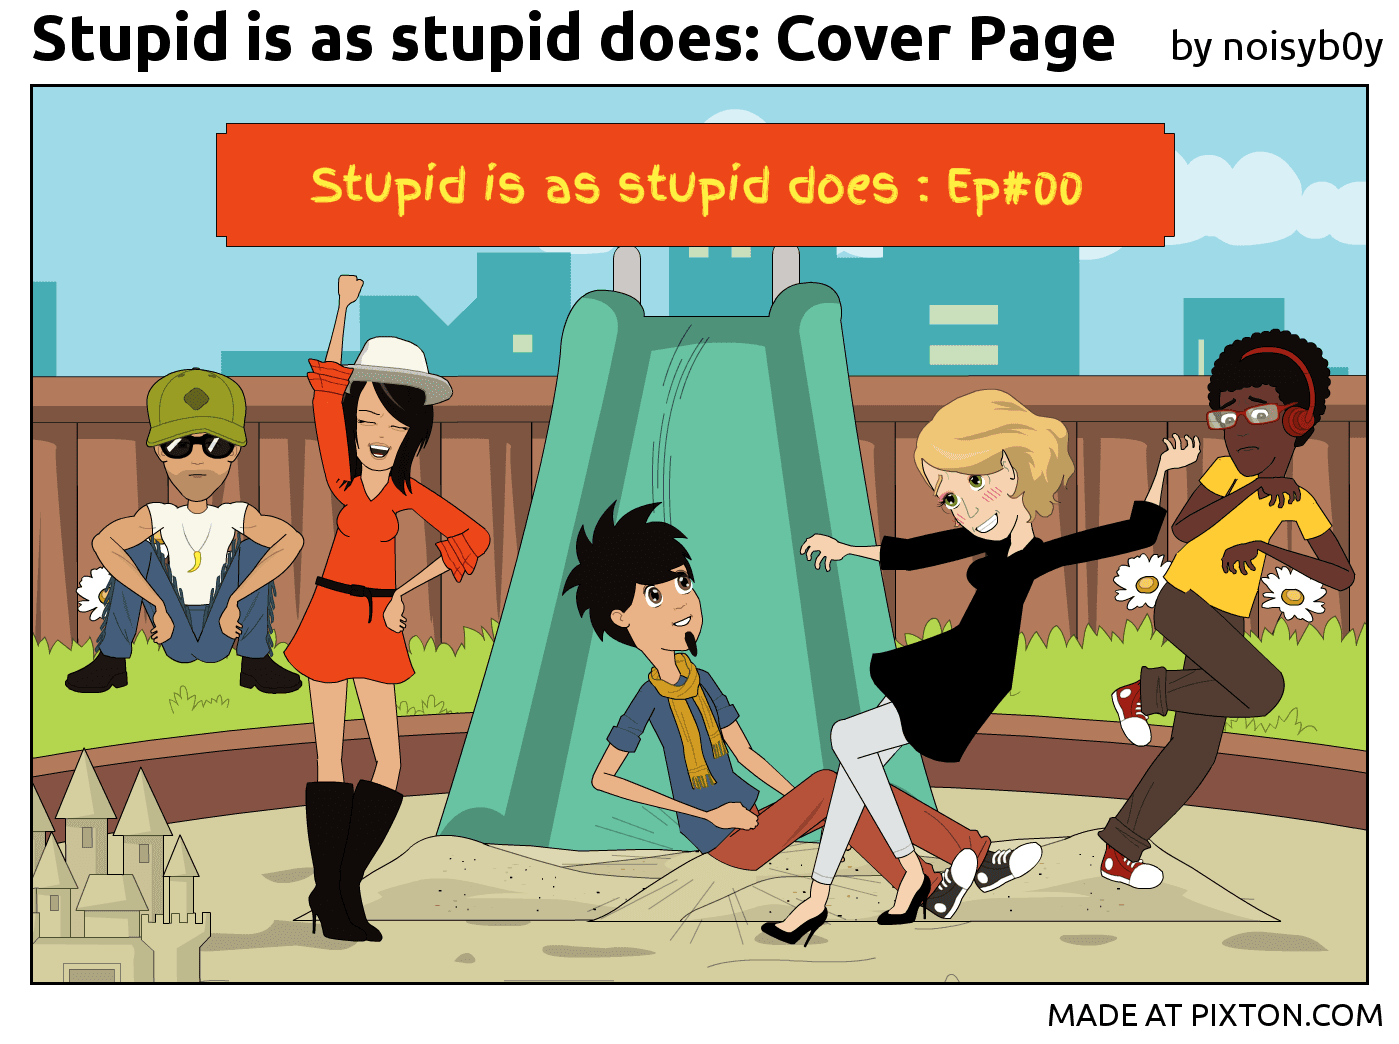 Pixton_Comic_Stupid_is_as_stupid_does_Cover_Page_by_noisyb0y.png